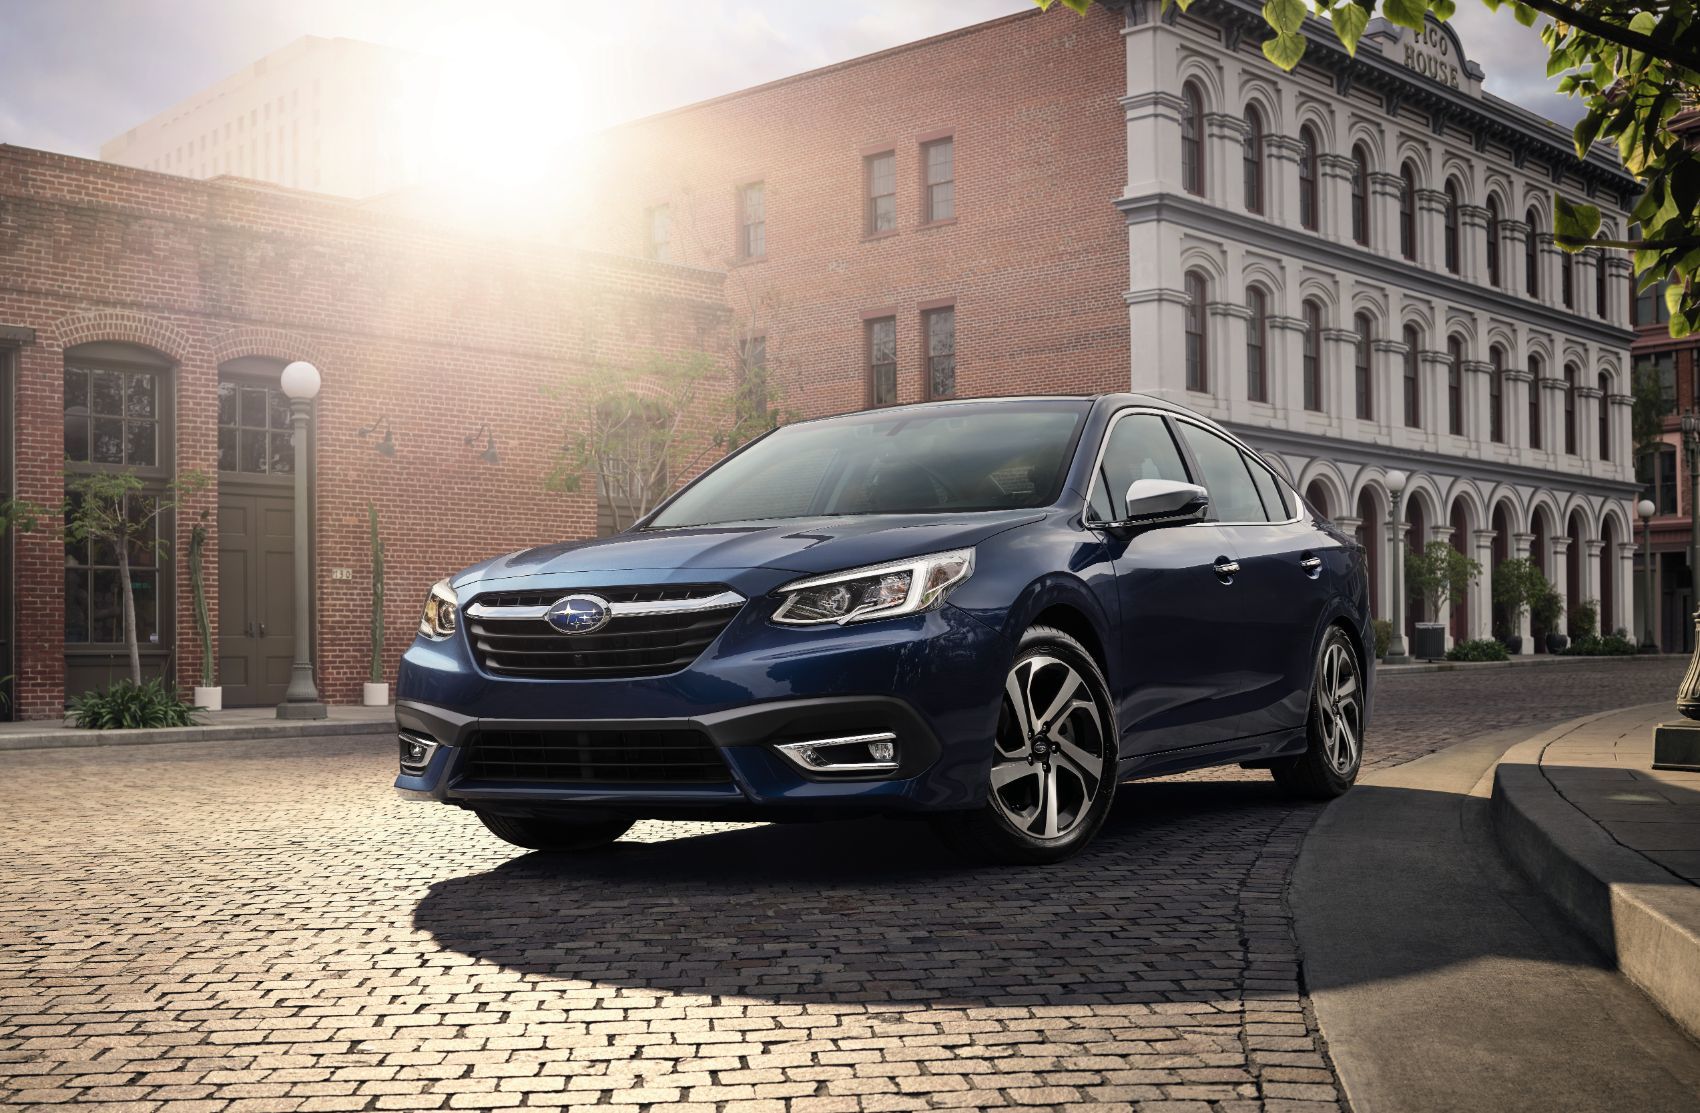 2021 Subaru Legacy: Trim Levels, Pricing Info & Other Fast Facts